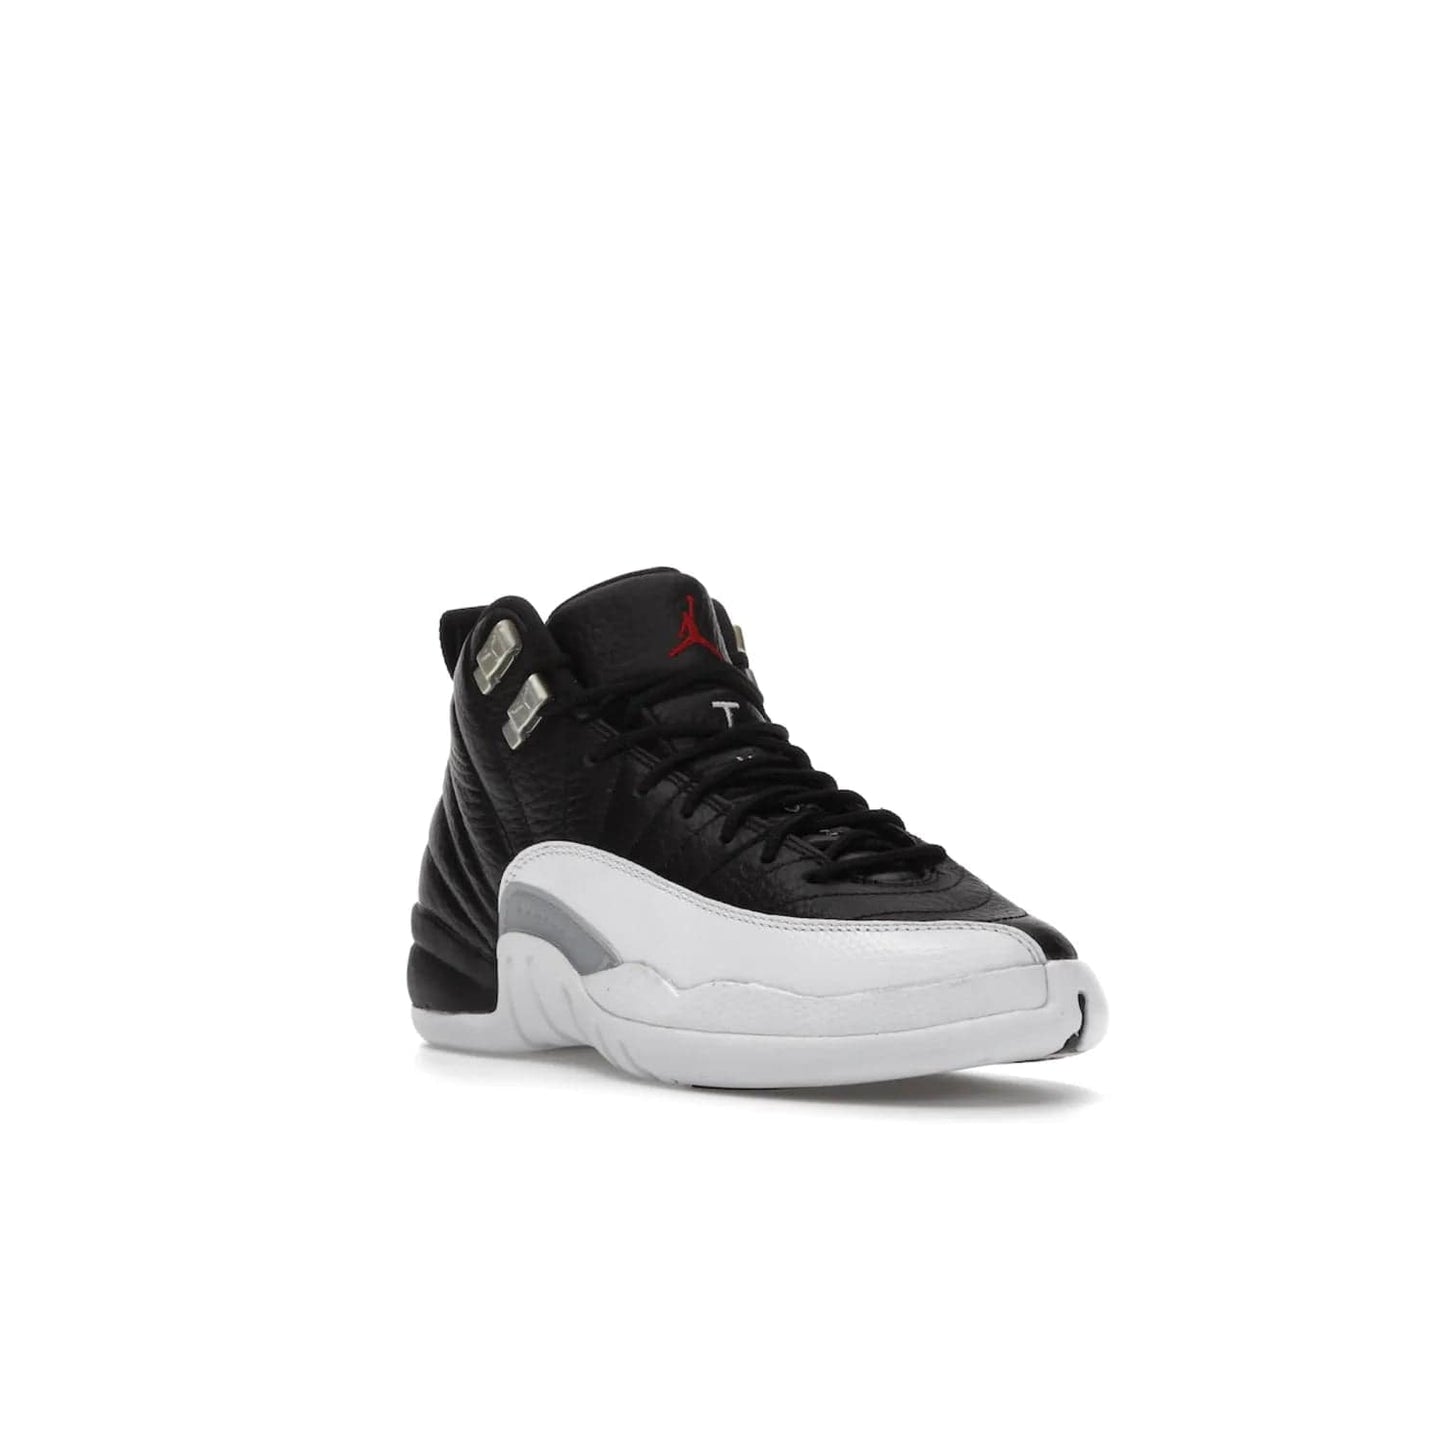 Jordan 12 Retro Playoffs (2022) (GS) - Image 6 - Only at www.BallersClubKickz.com - Air Jordan 12 Retro Playoffs GS 2022 for active young athletes. Comfort and style in a combination of black tumbled leather, white textured overlays and red/white/black outsole. Eye-catching details and signature carbon fiber shank plate.